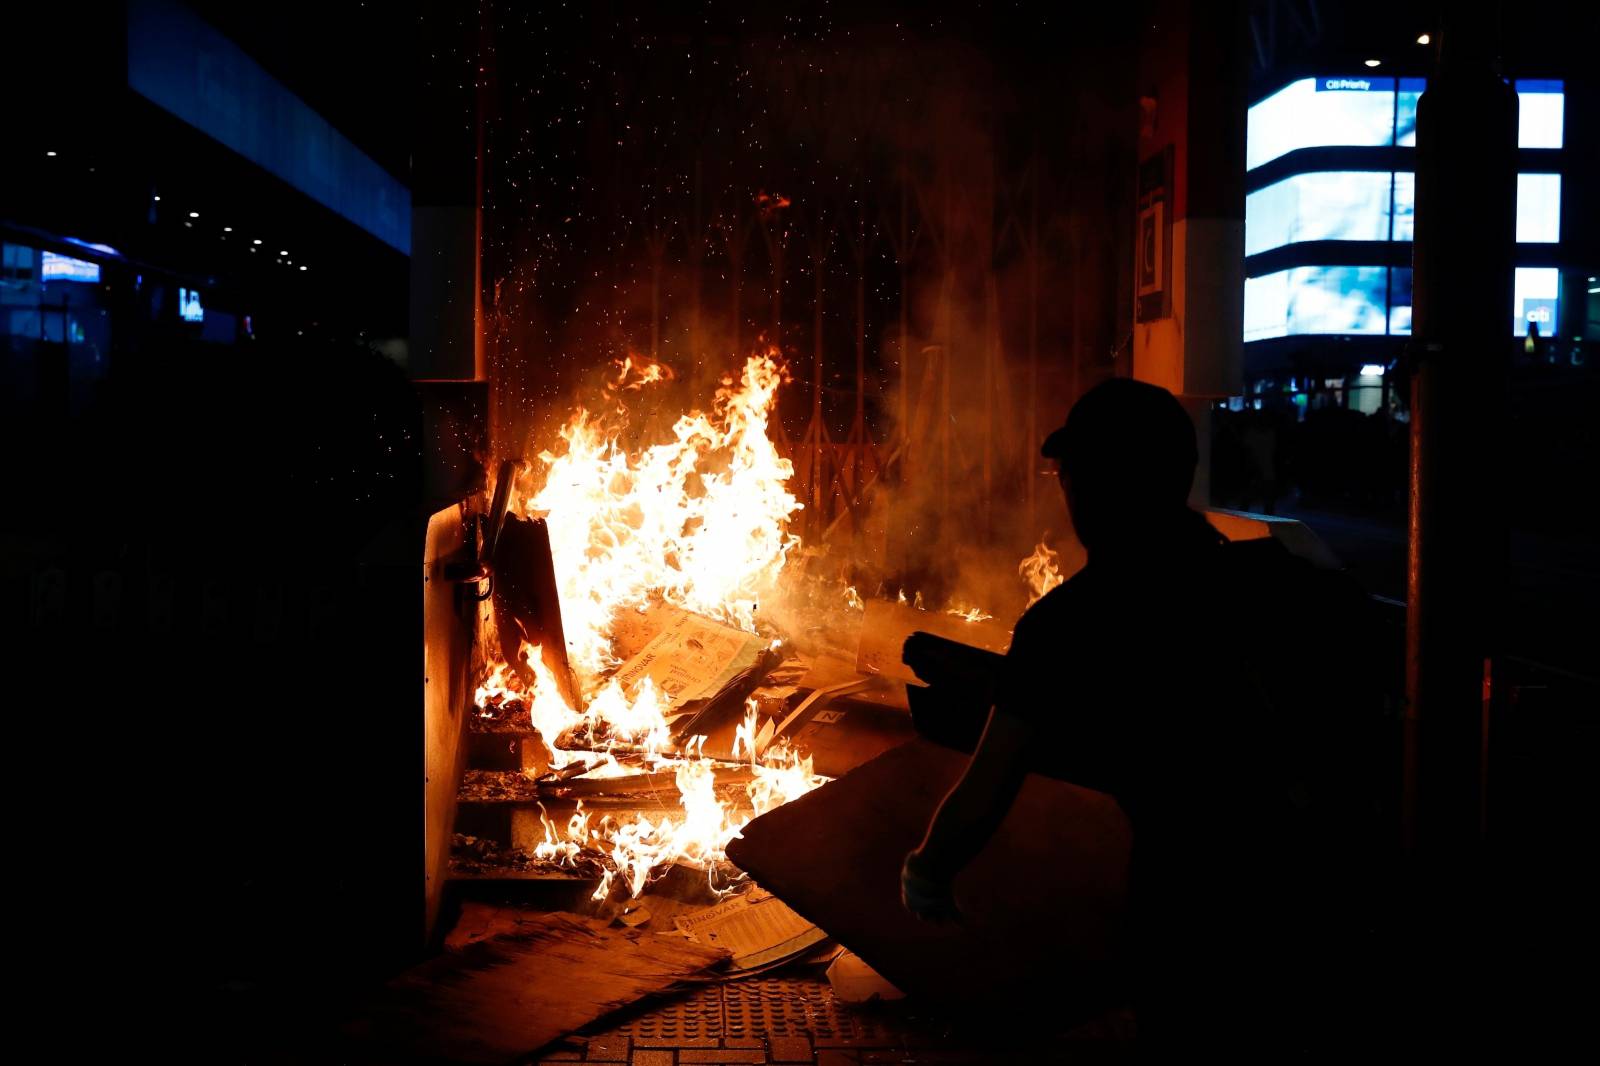 An anti-government protester wears a mask as he sets a fire outside Mong Kok Mass Transit Railway (MTR) station during a demonstration after government's ban on face masks under emergency law, at Mong Kok